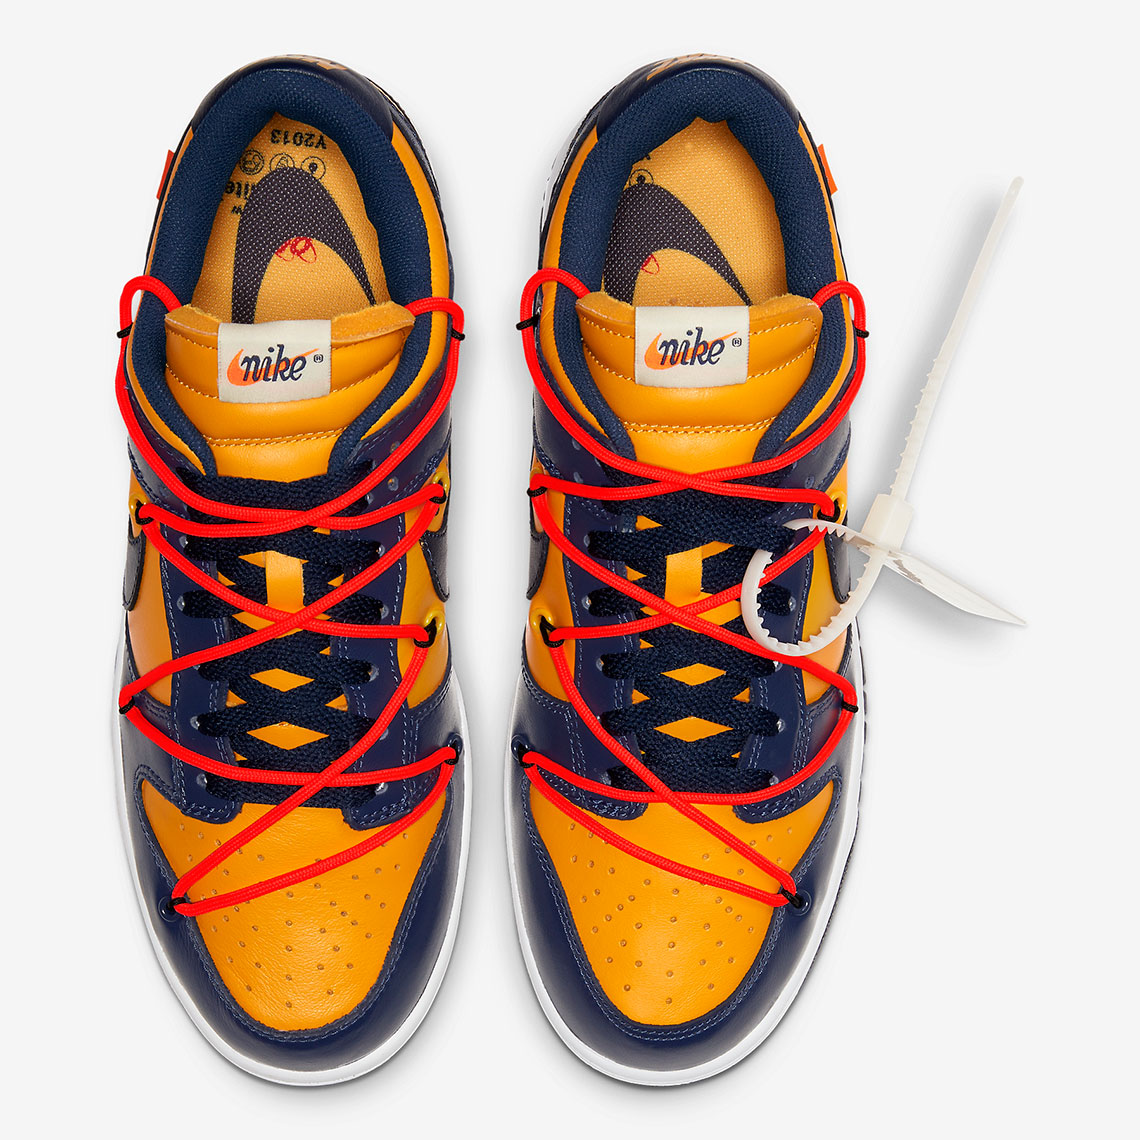 Off White Nike Dunk Low Michigan Ct0856 700 Official Images 3